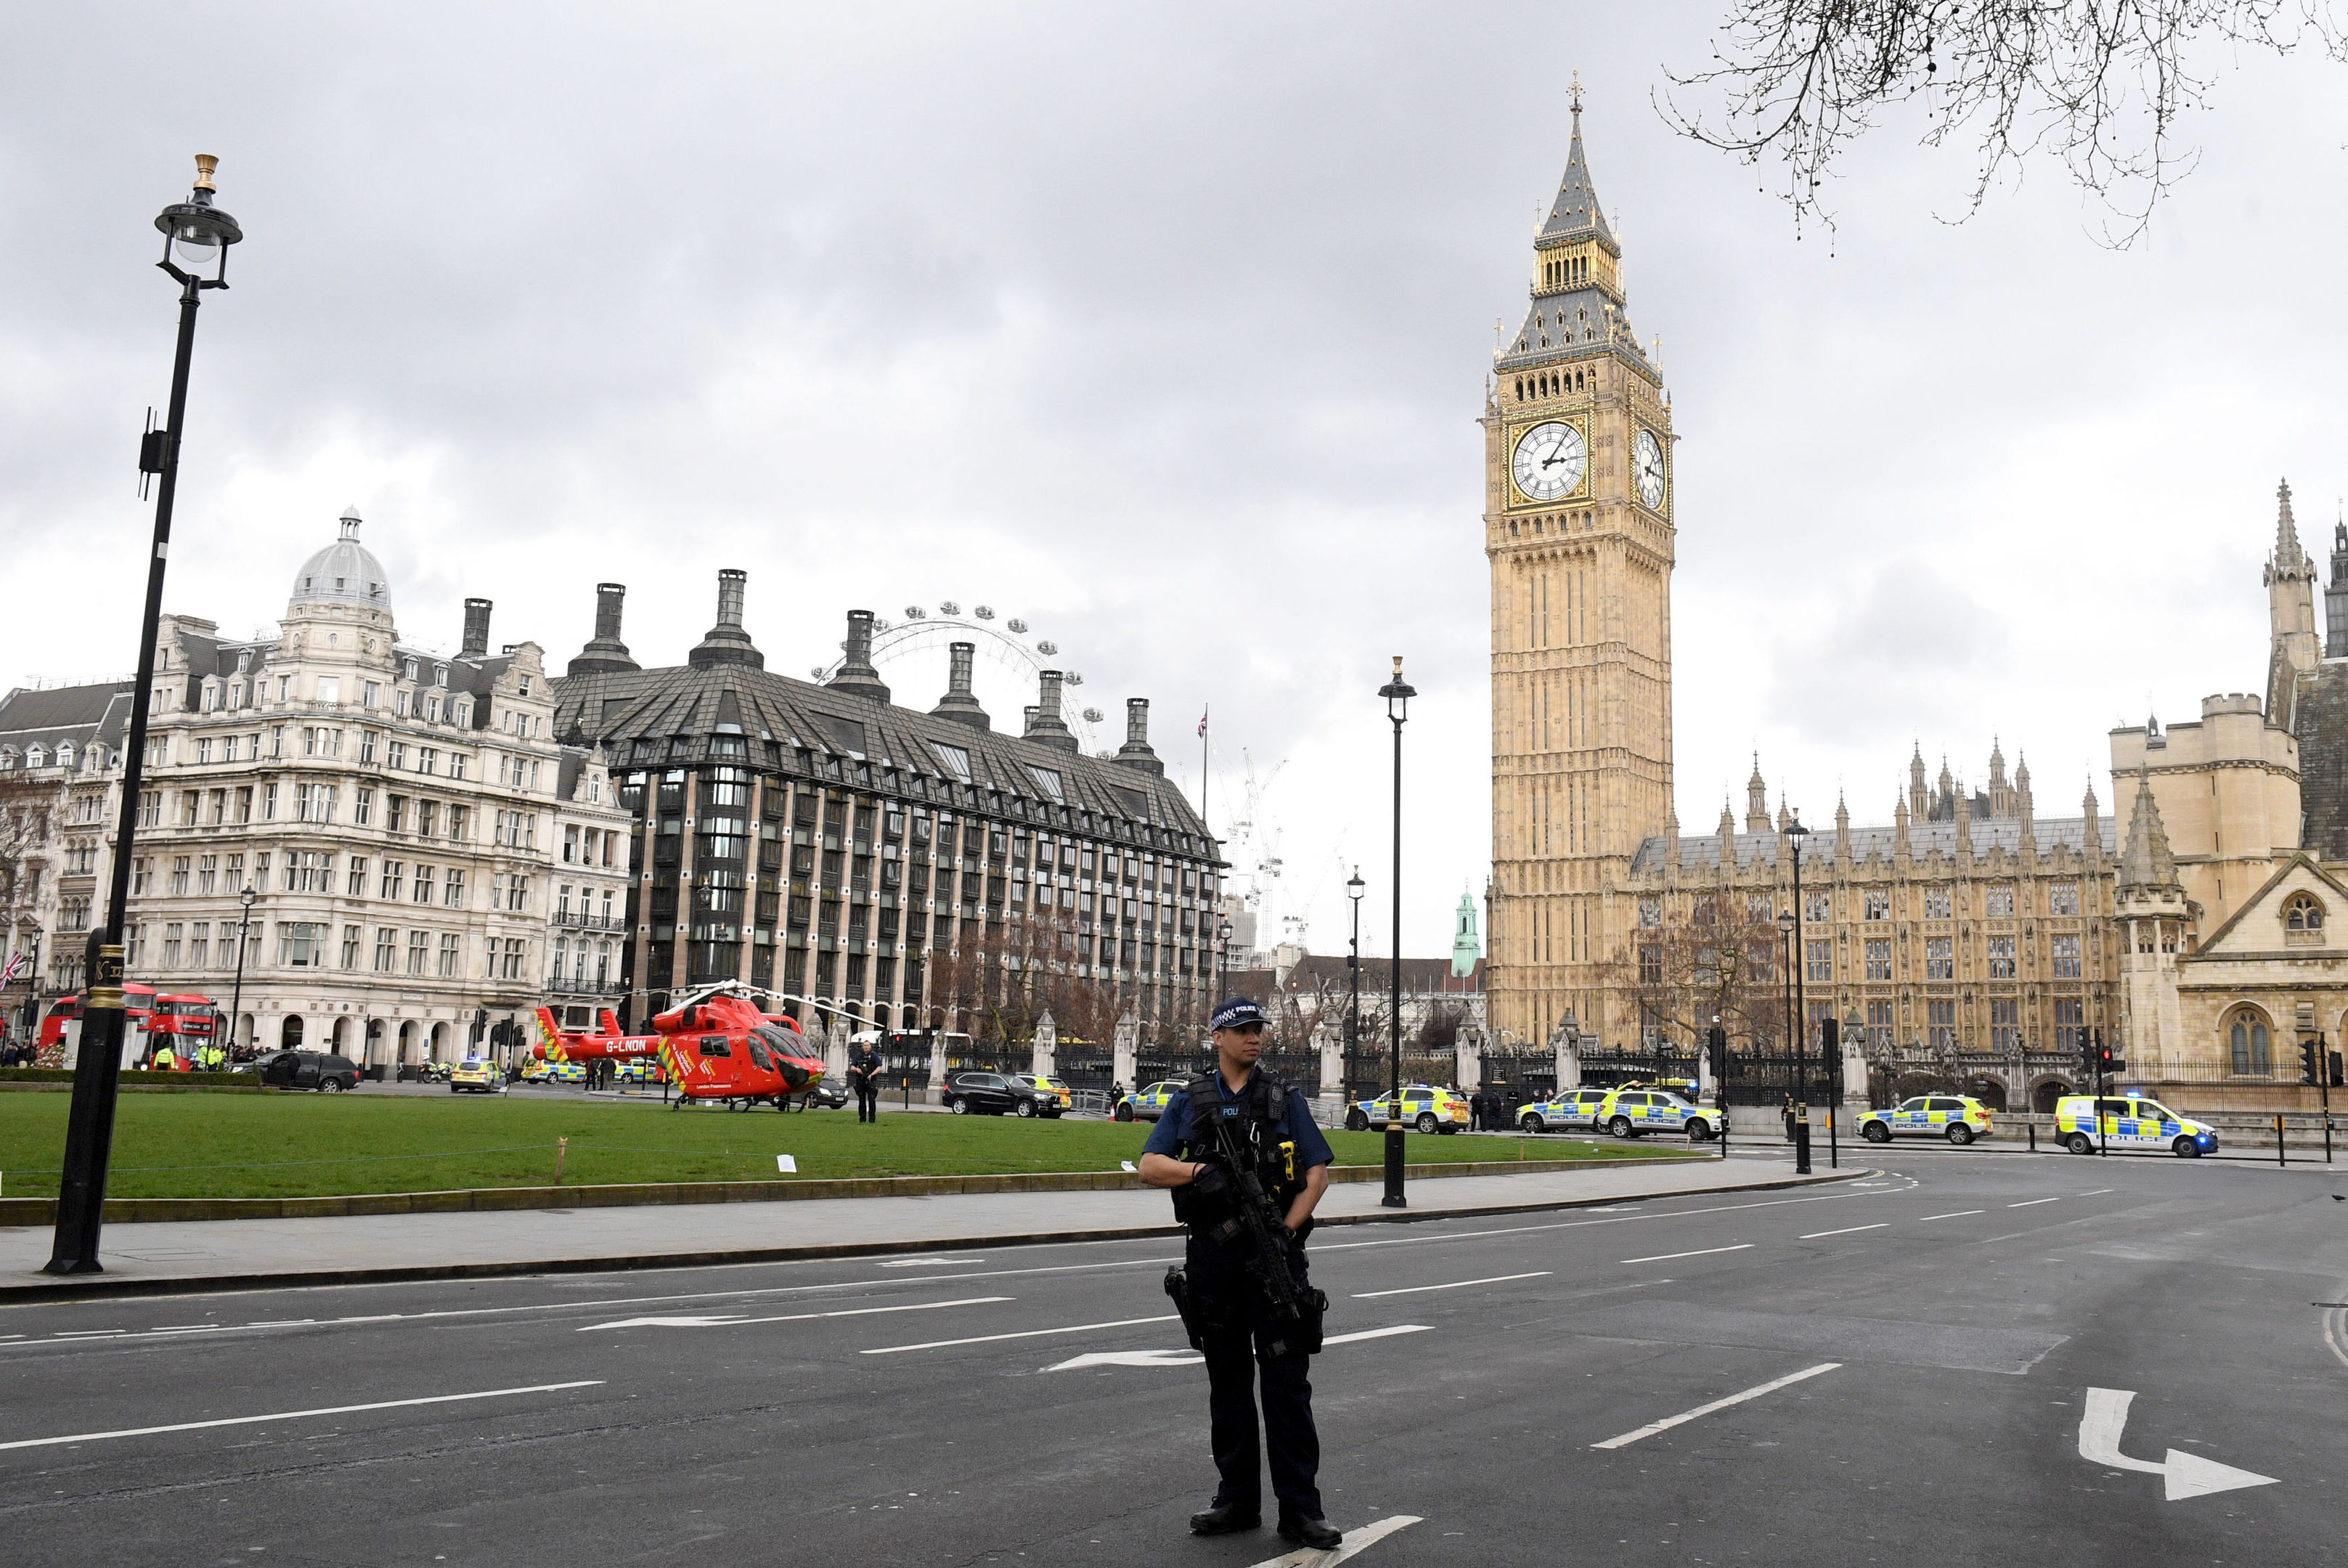 Police outside the Palace of Westminster, London (Victoria Jones/PA Wire)